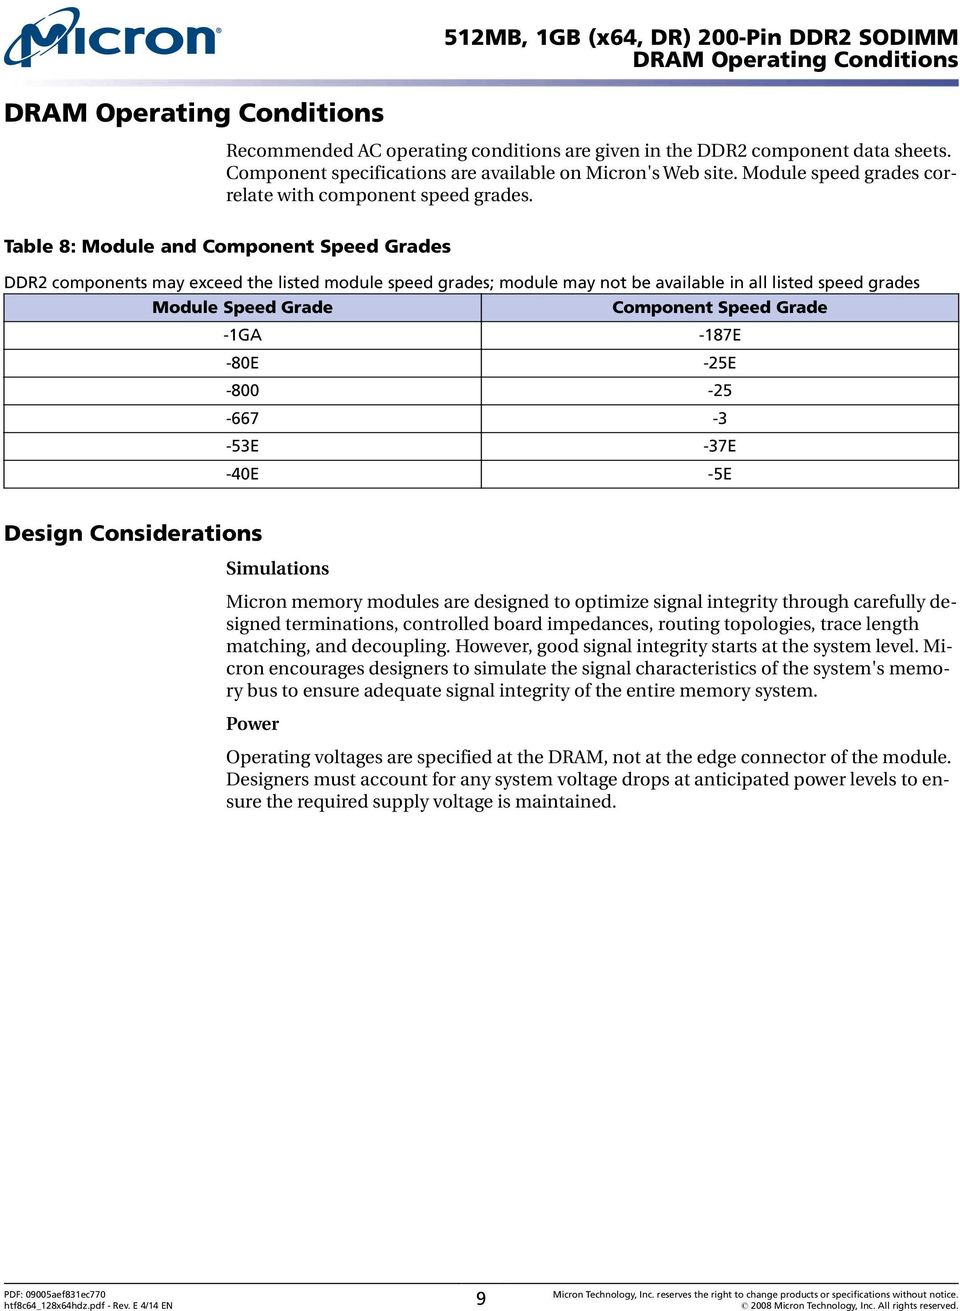 Table 8: Module and Component Speed Grades DDR components may exceed the listed module speed grades; module may not be available in all listed speed grades Module Speed Grade Component Speed Grade